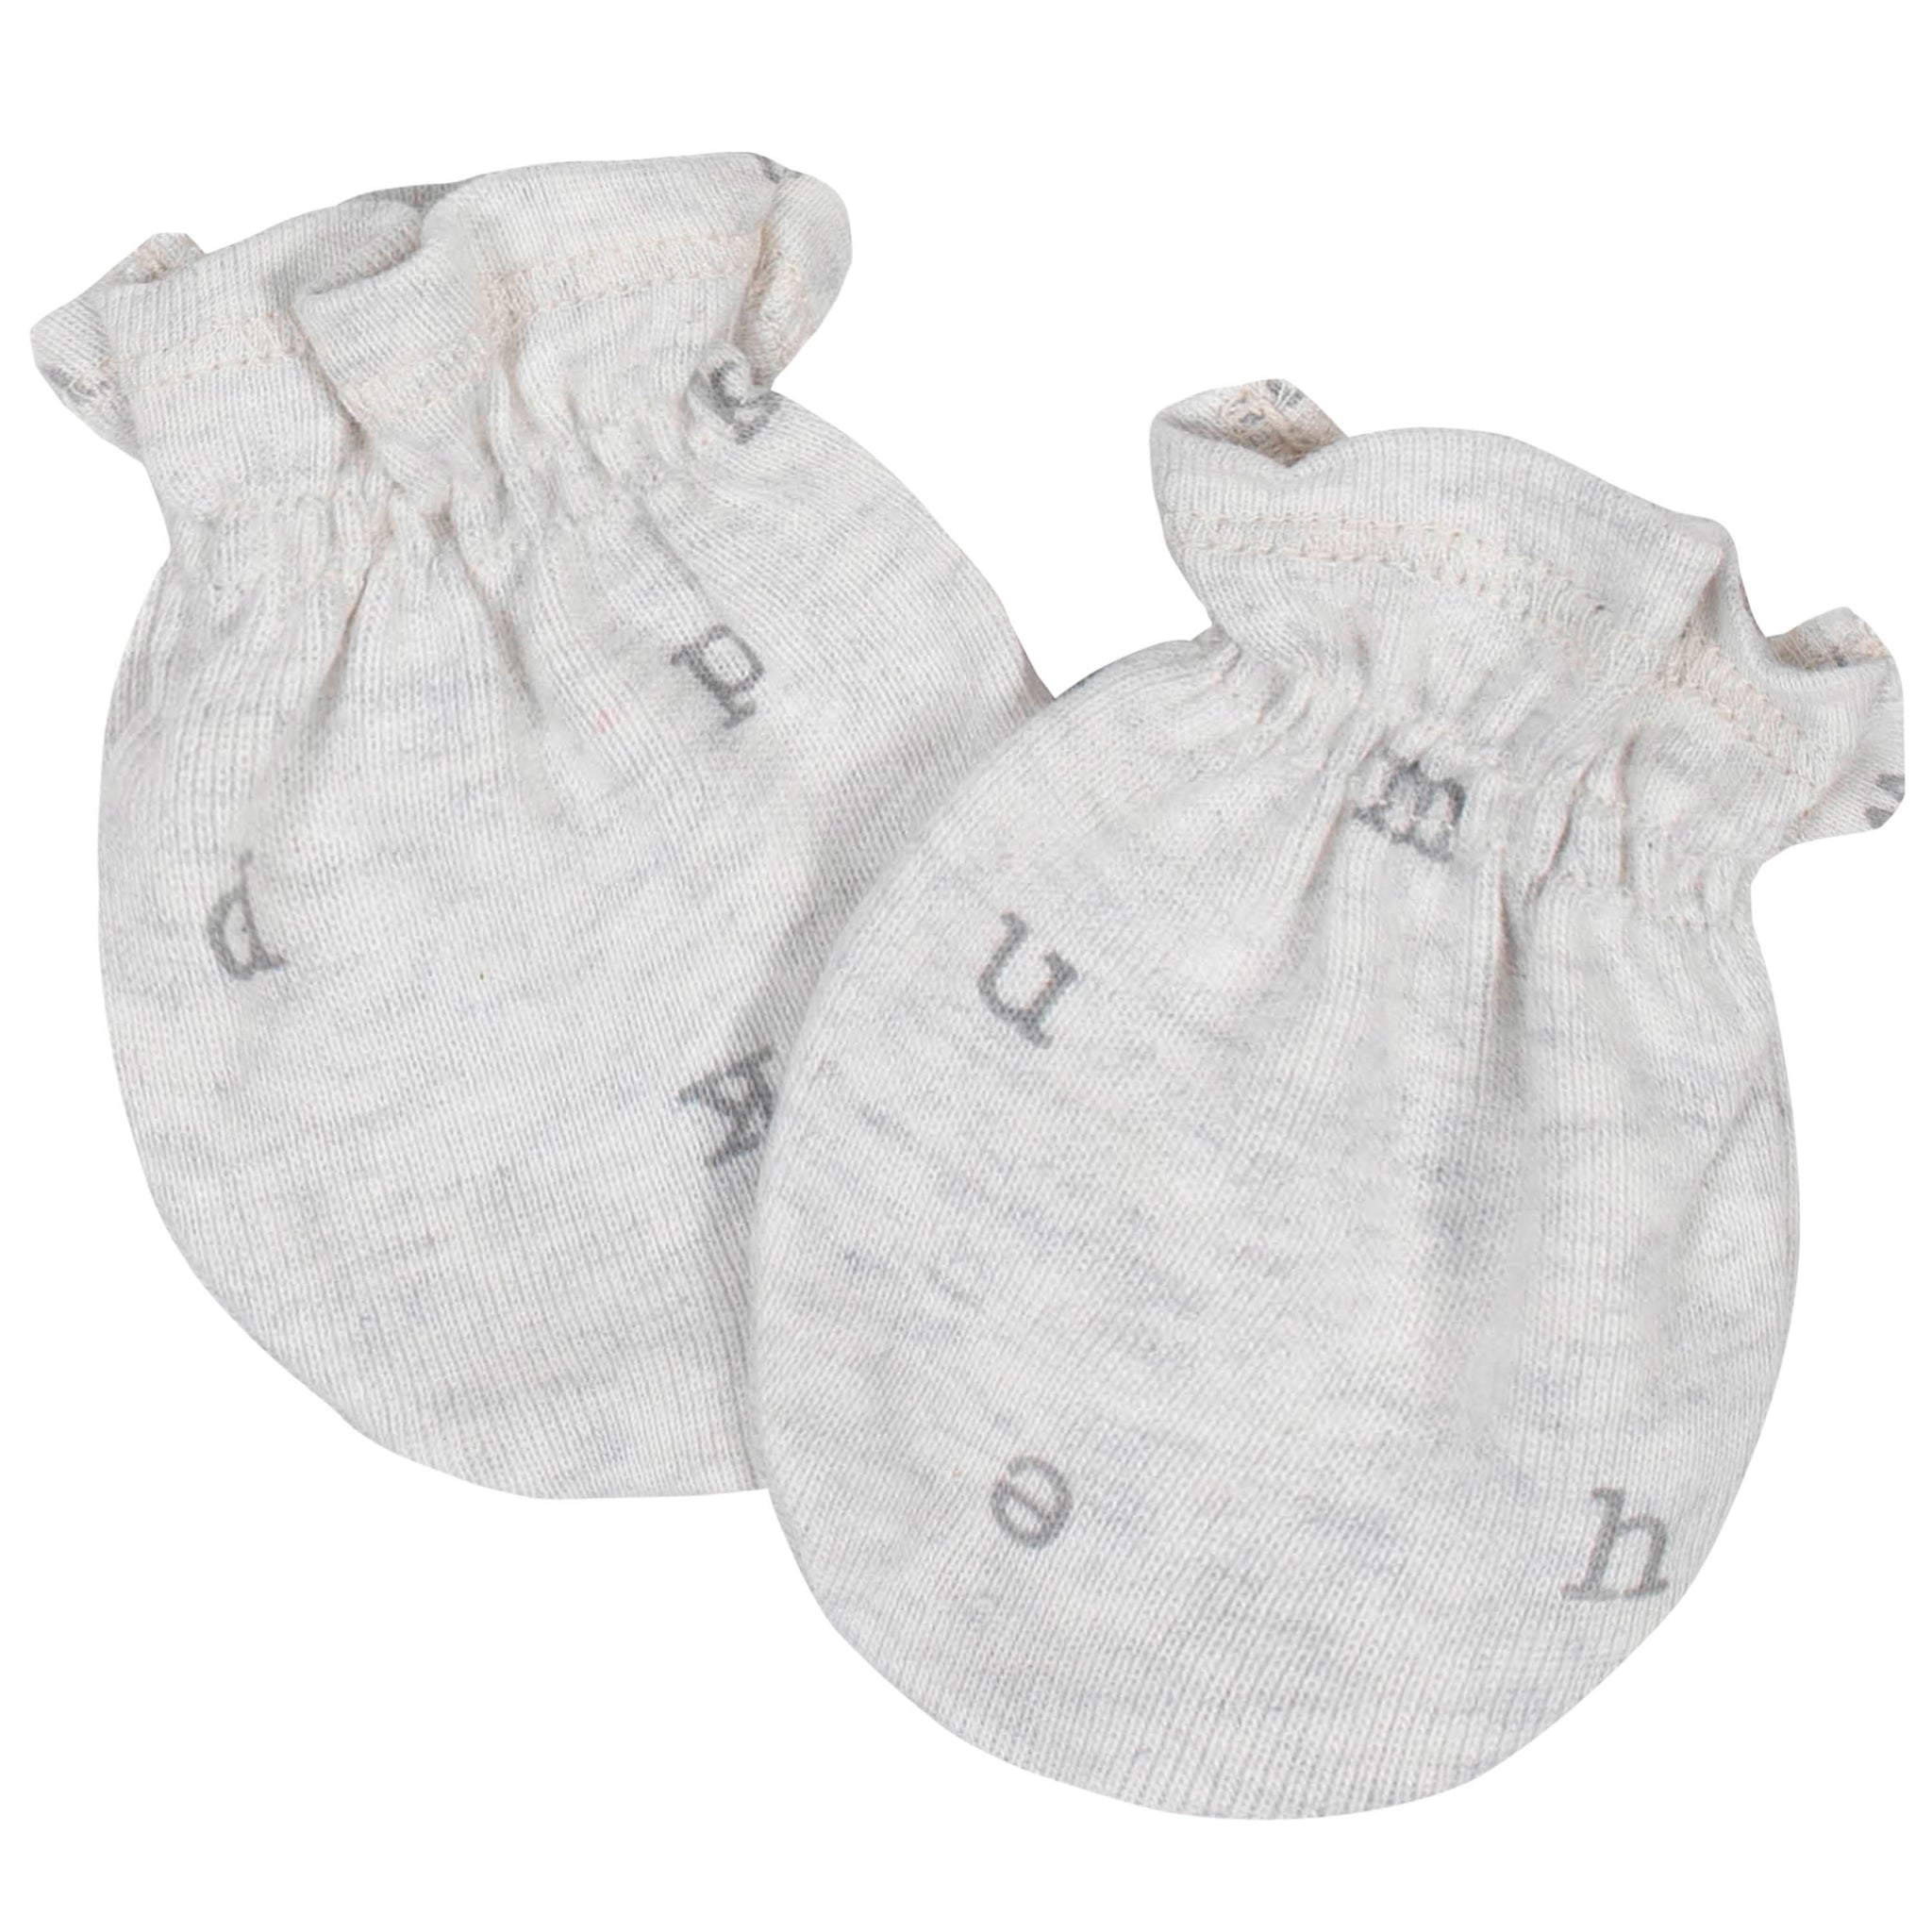 8-Piece Baby Neutral Hugs Caps and Mittens Bundle-Gerber Childrenswear Wholesale